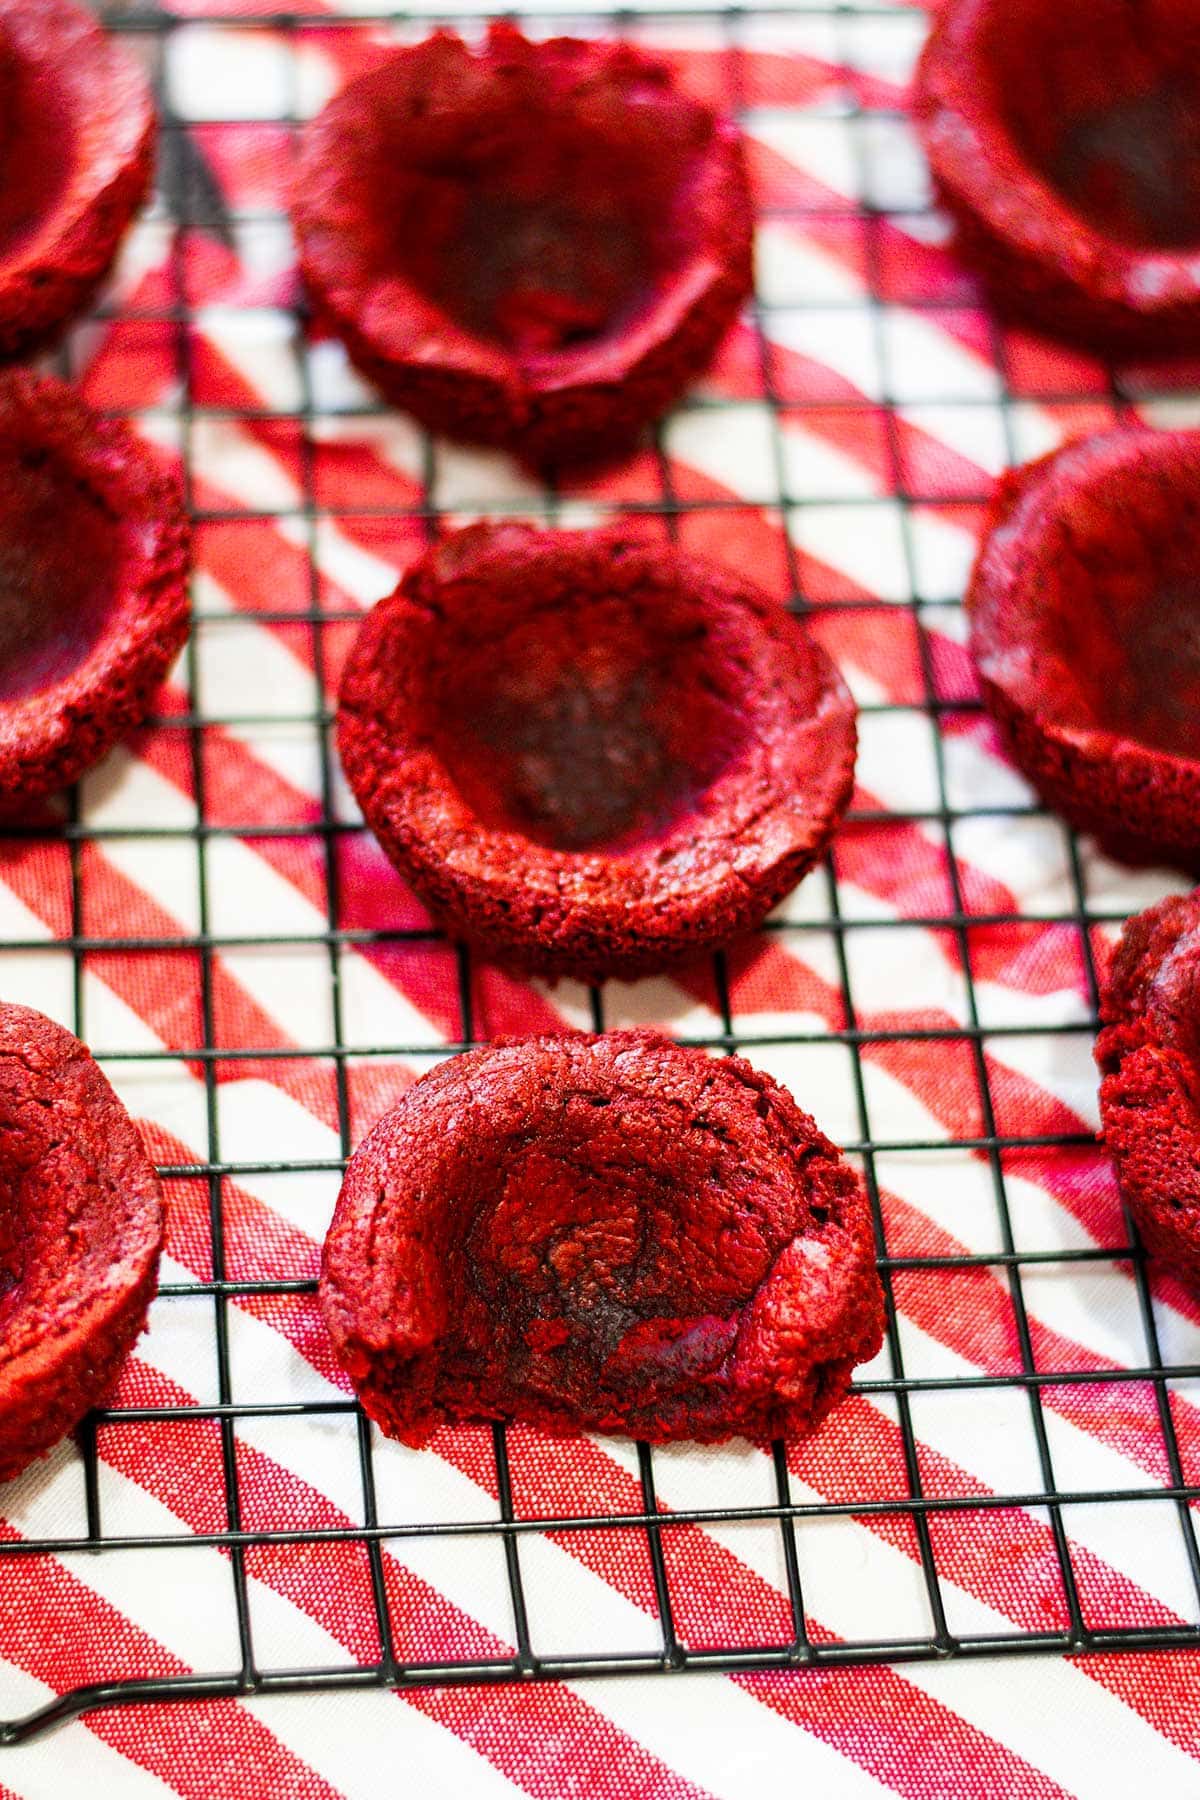 Red Velvet Brownie Cups on a cooling rack with a white and red striped tea towel underneath.